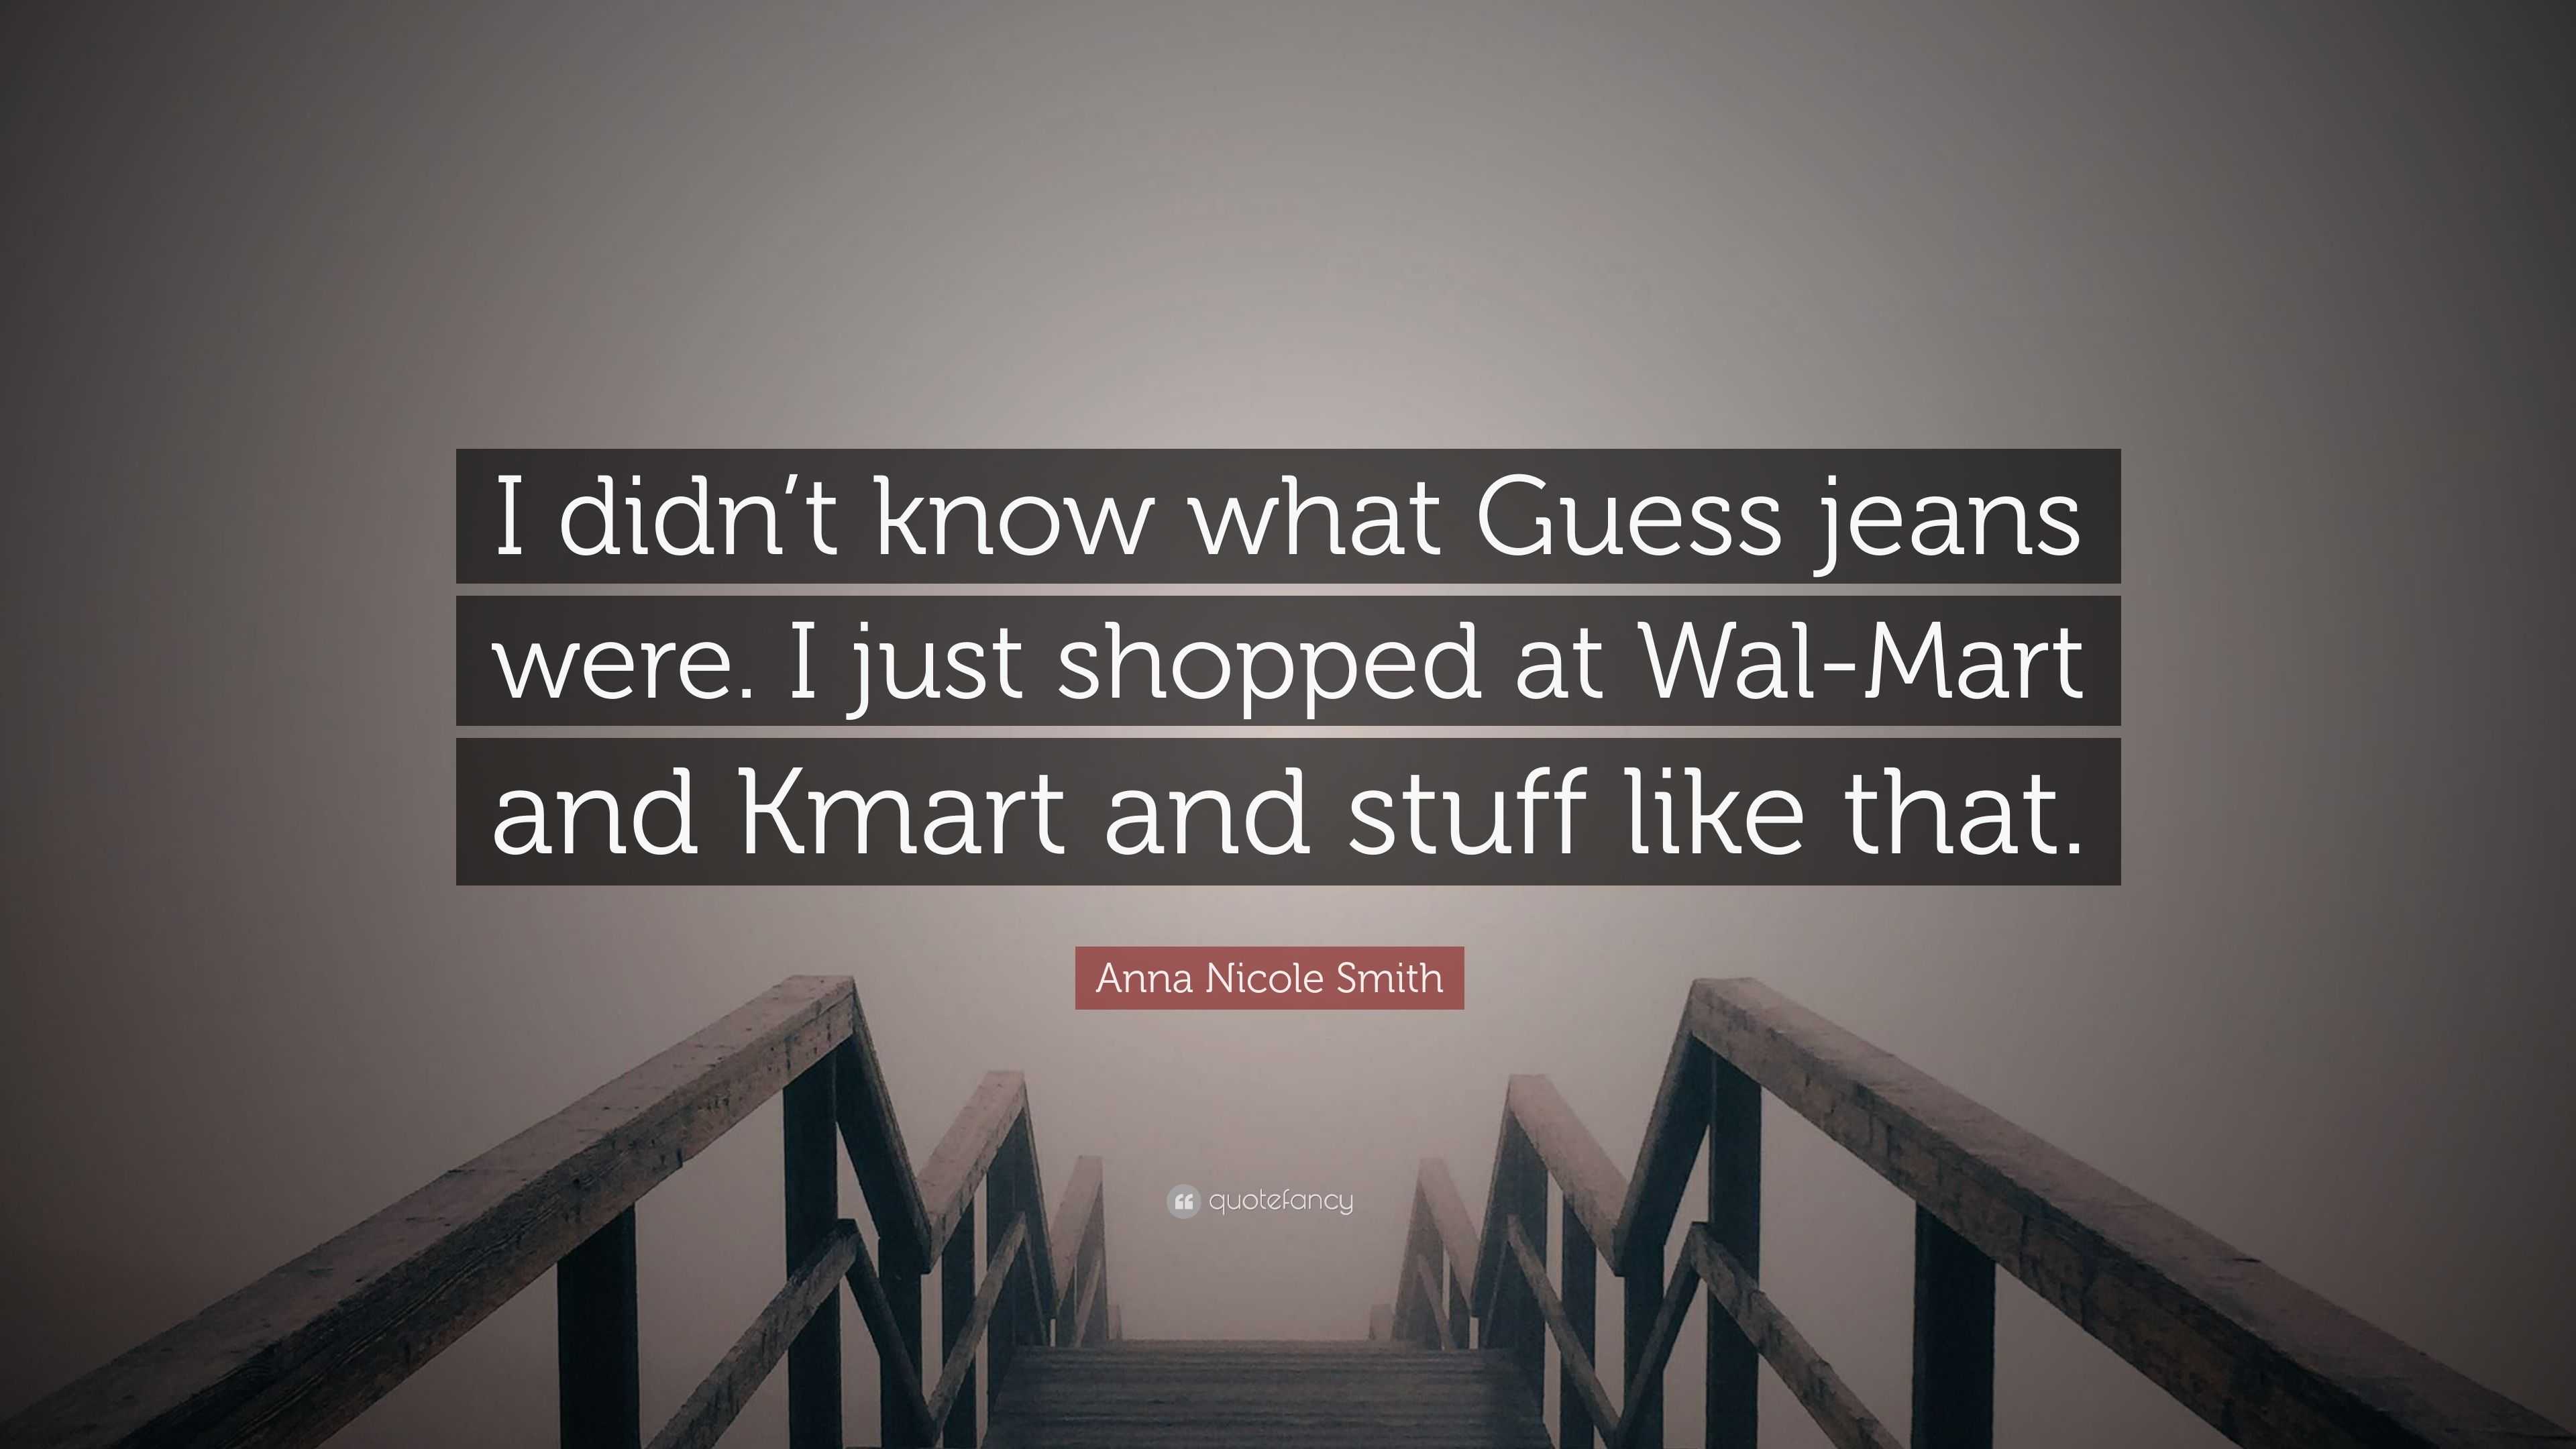 Anna Nicole Smith Quote: “I didn't know what Guess jeans were. I just  shopped at